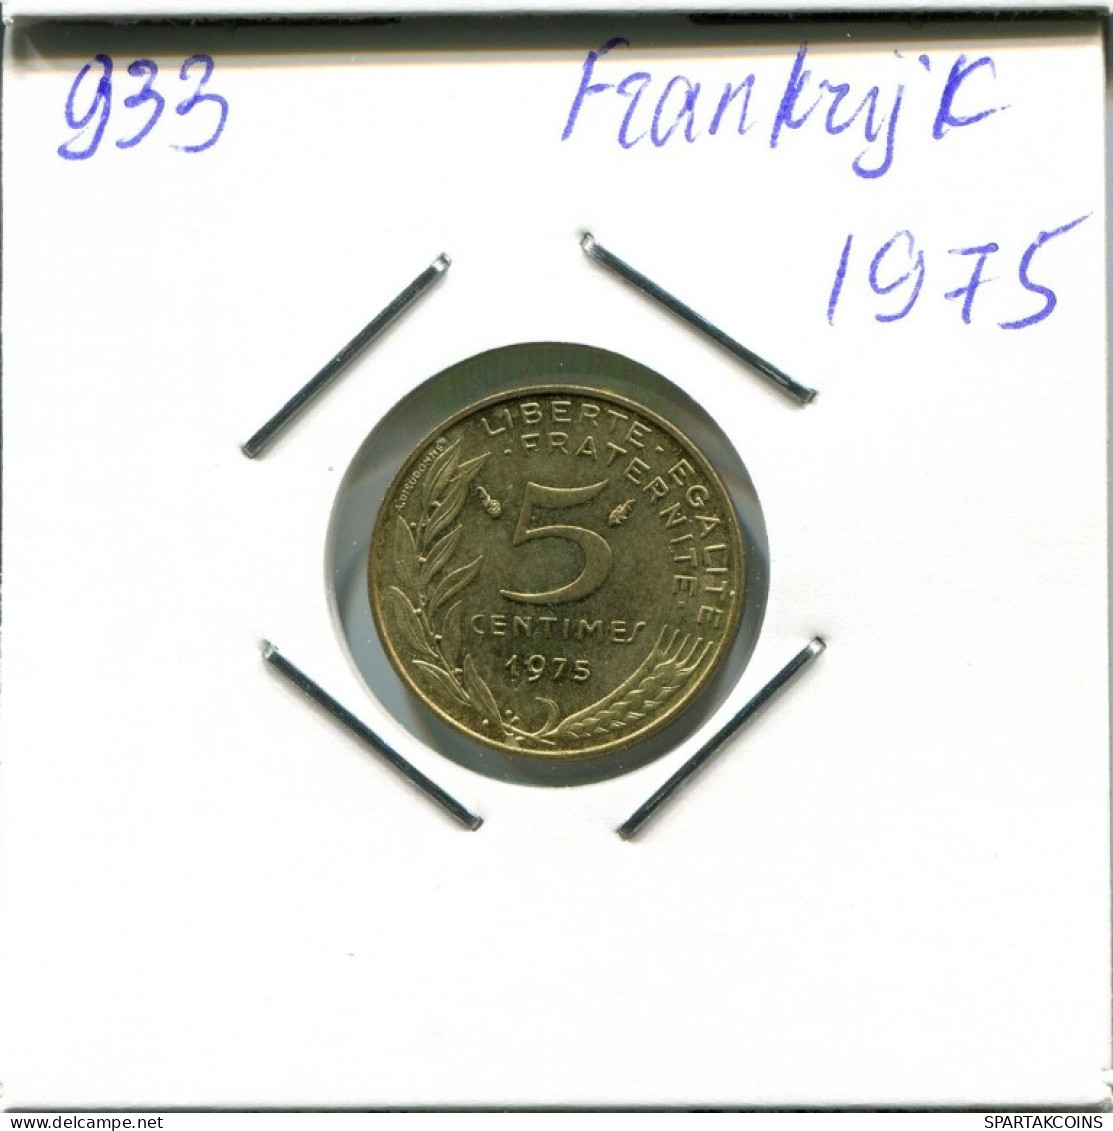 5 CENTIMES 1975 FRANCE Coin French Coin #AN017.U.A - 5 Centimes